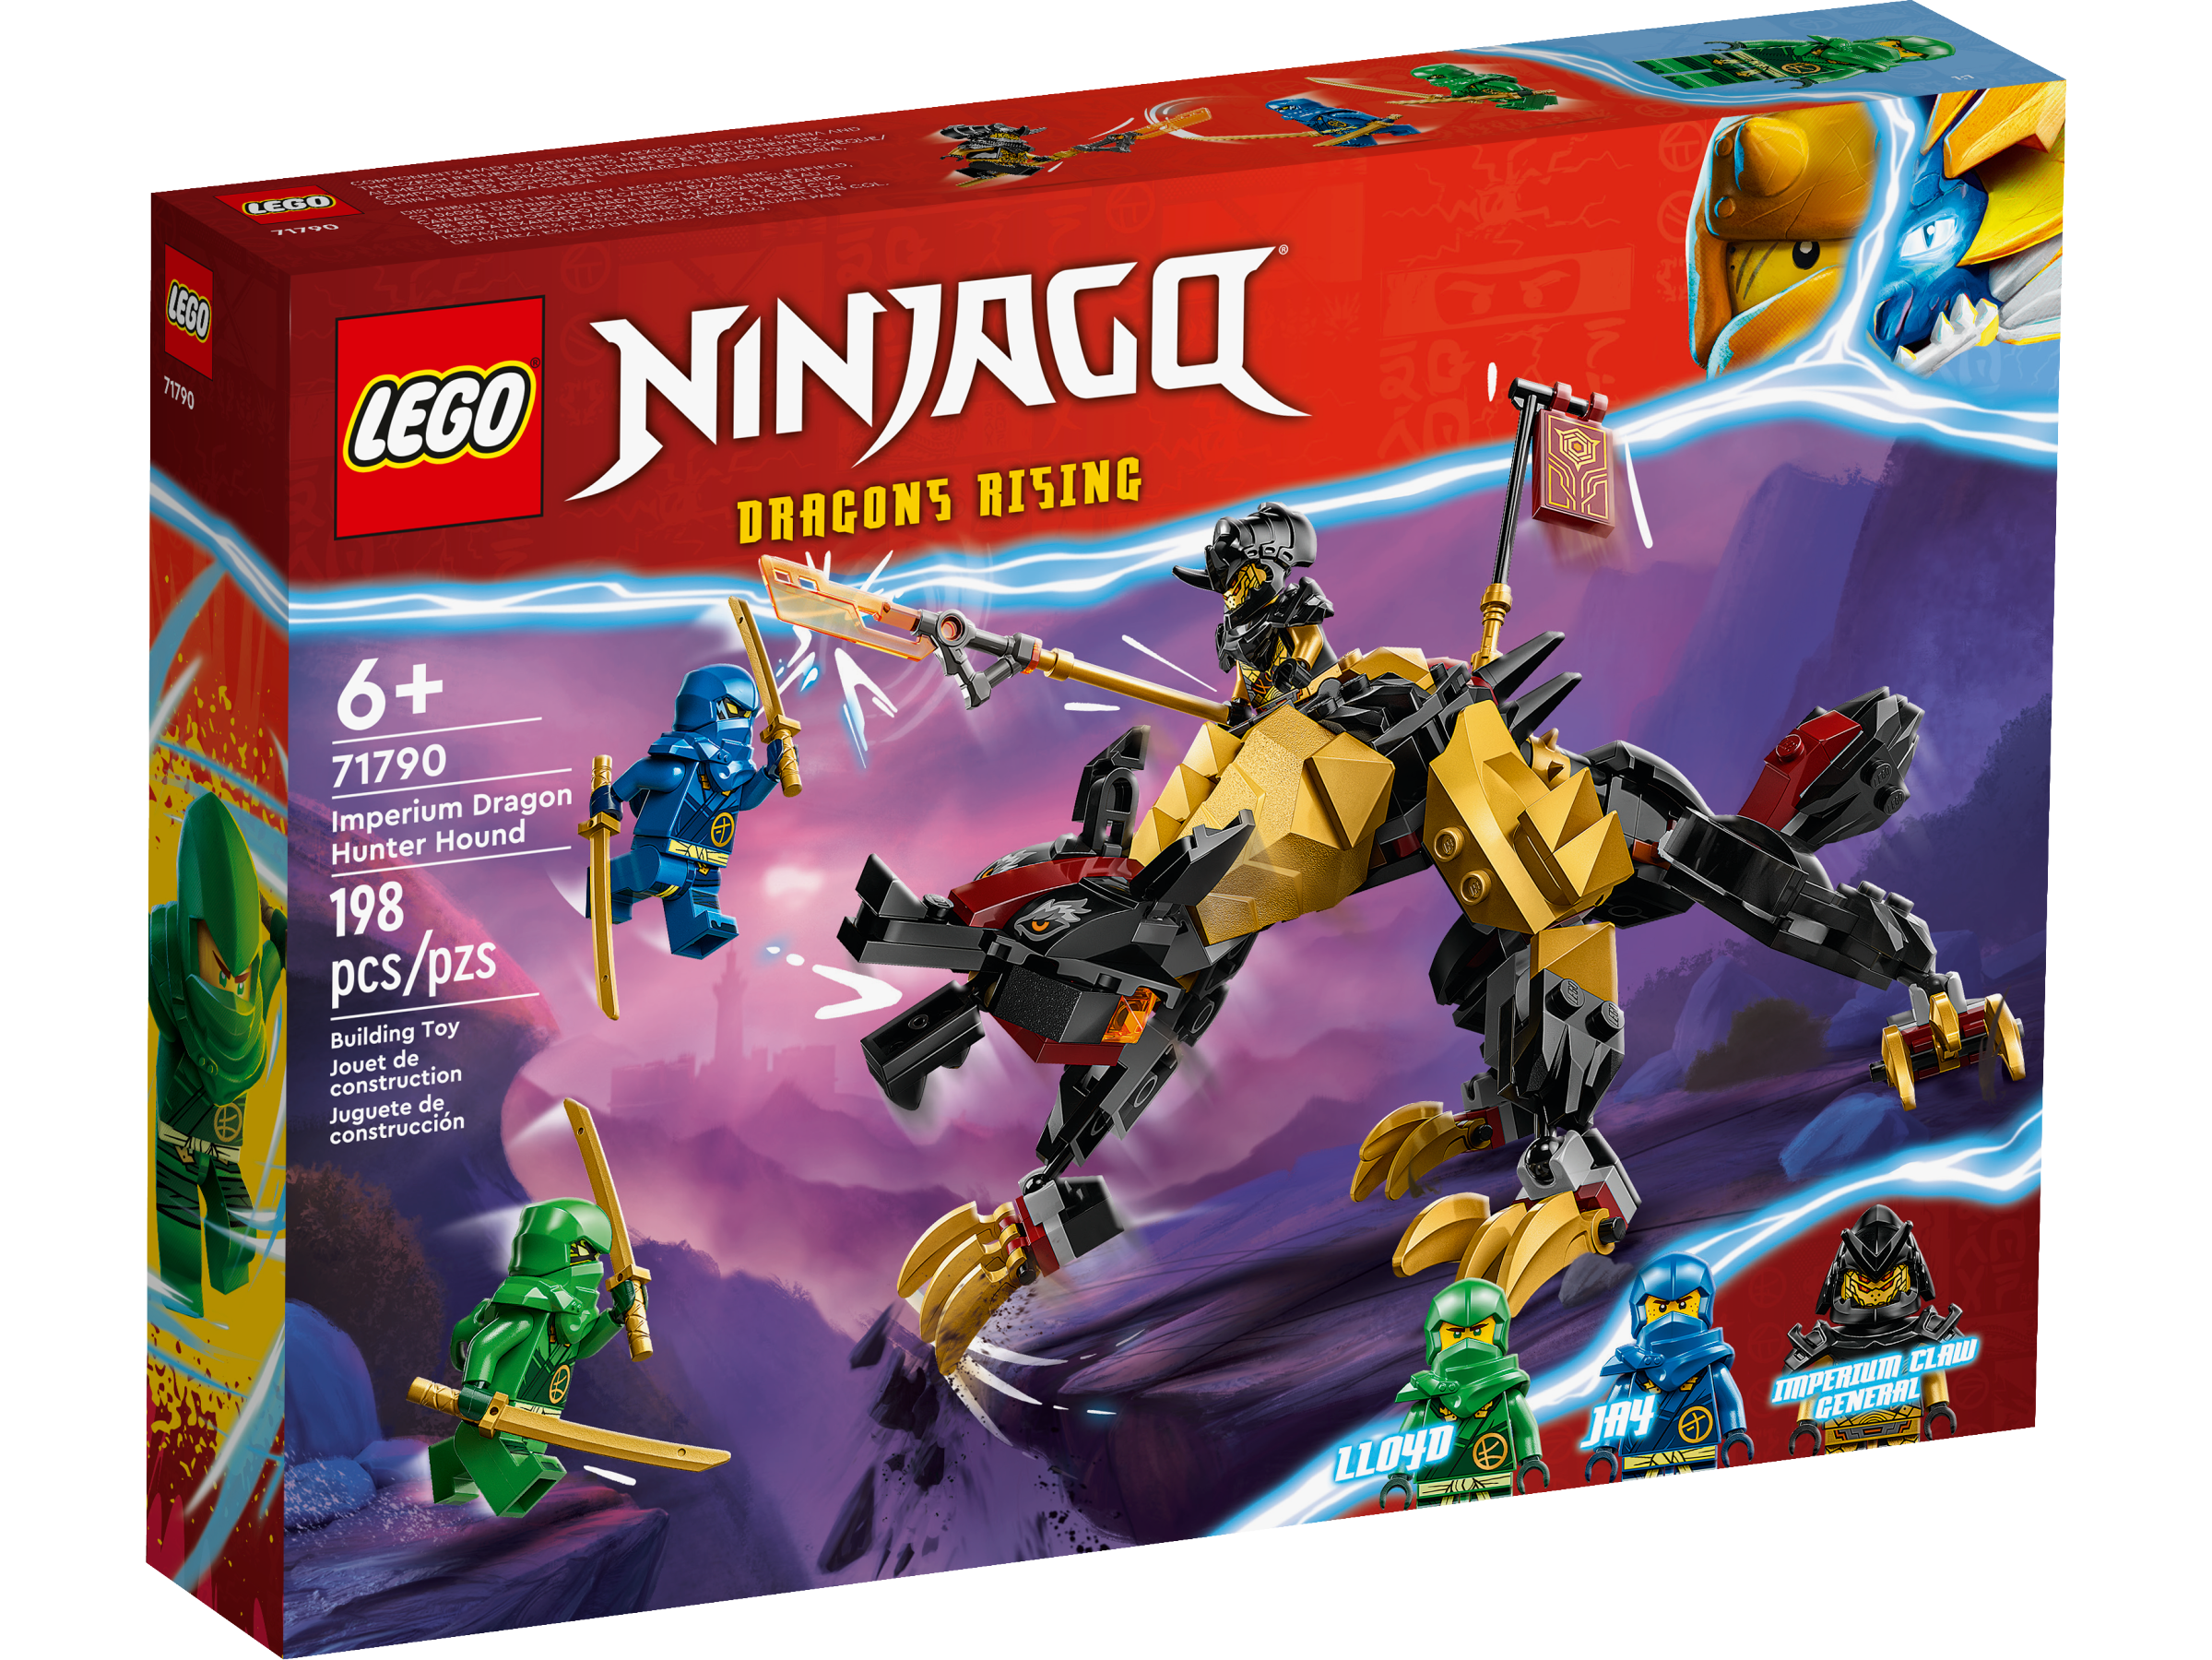 LEGO NINJAGO Dragons Rising welcomes fans with new set